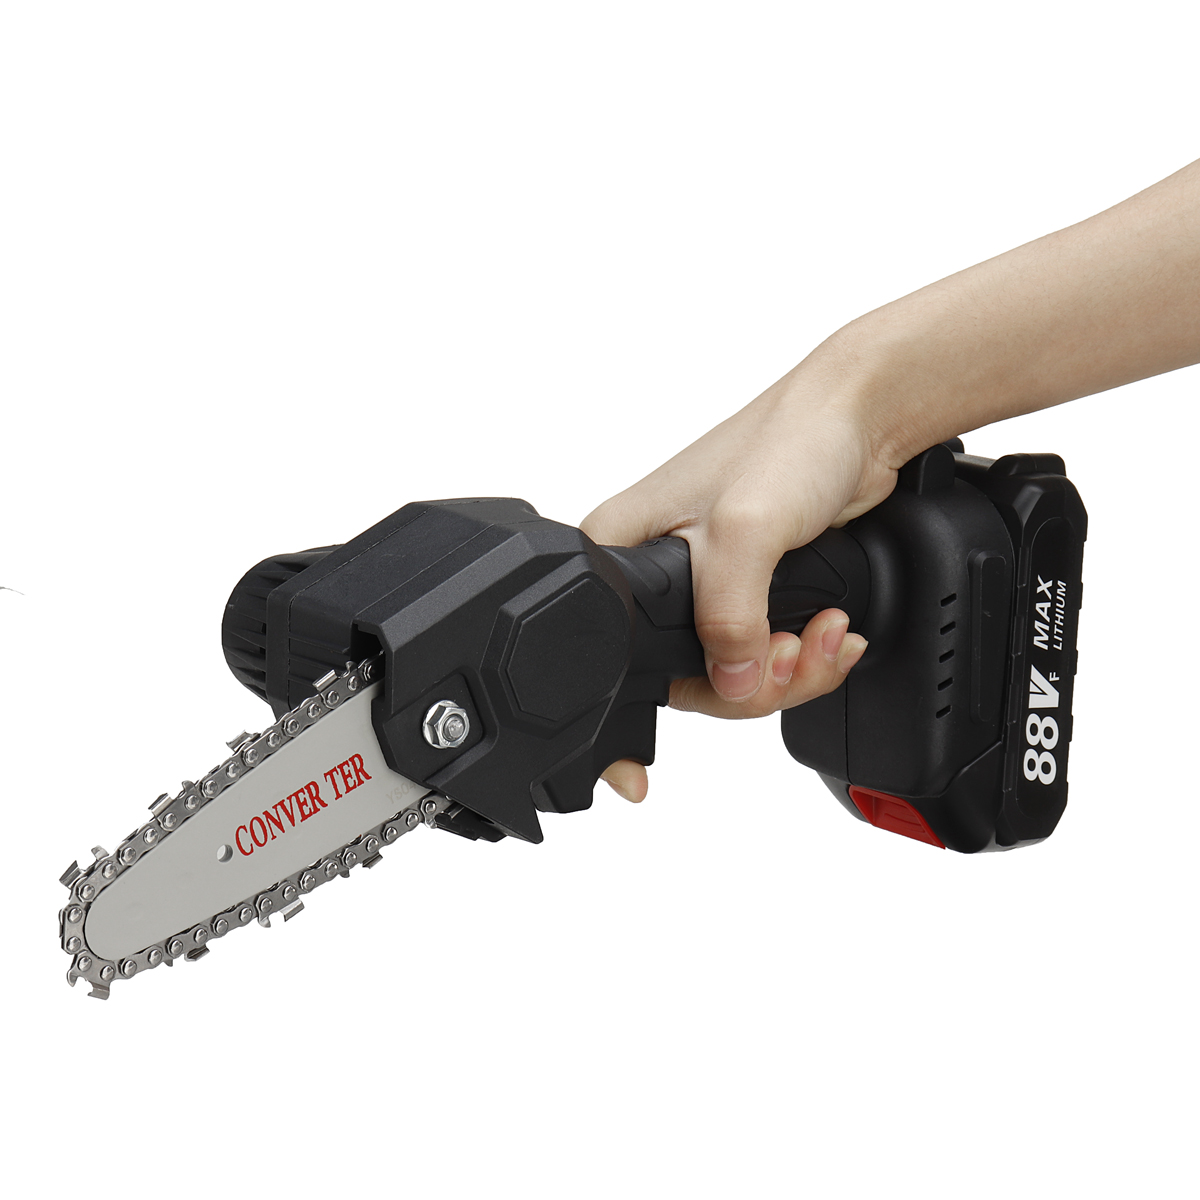 4-Inch-7500mAh-Mini-Electric-Chain-Saw-Pruning-Chainsaw-Cordless-Garden-Tree-Logging-Trimming-Saw-Fo-1798984-10